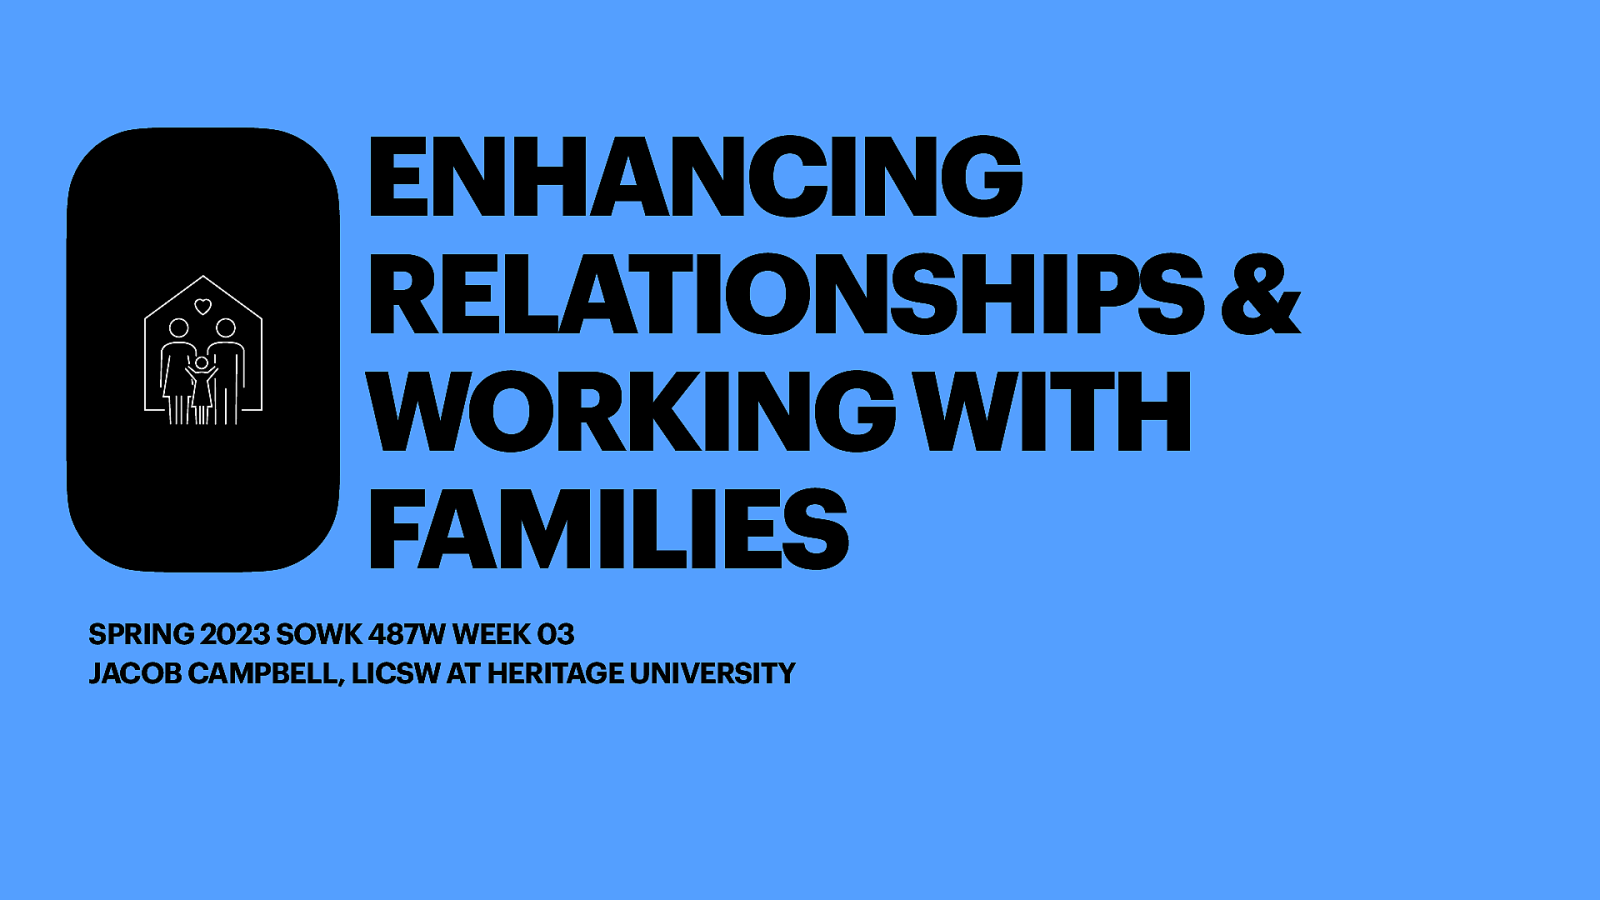 Spring 2023 SOWK 487w Week 03 - Enhancing Relationships and Working with Families